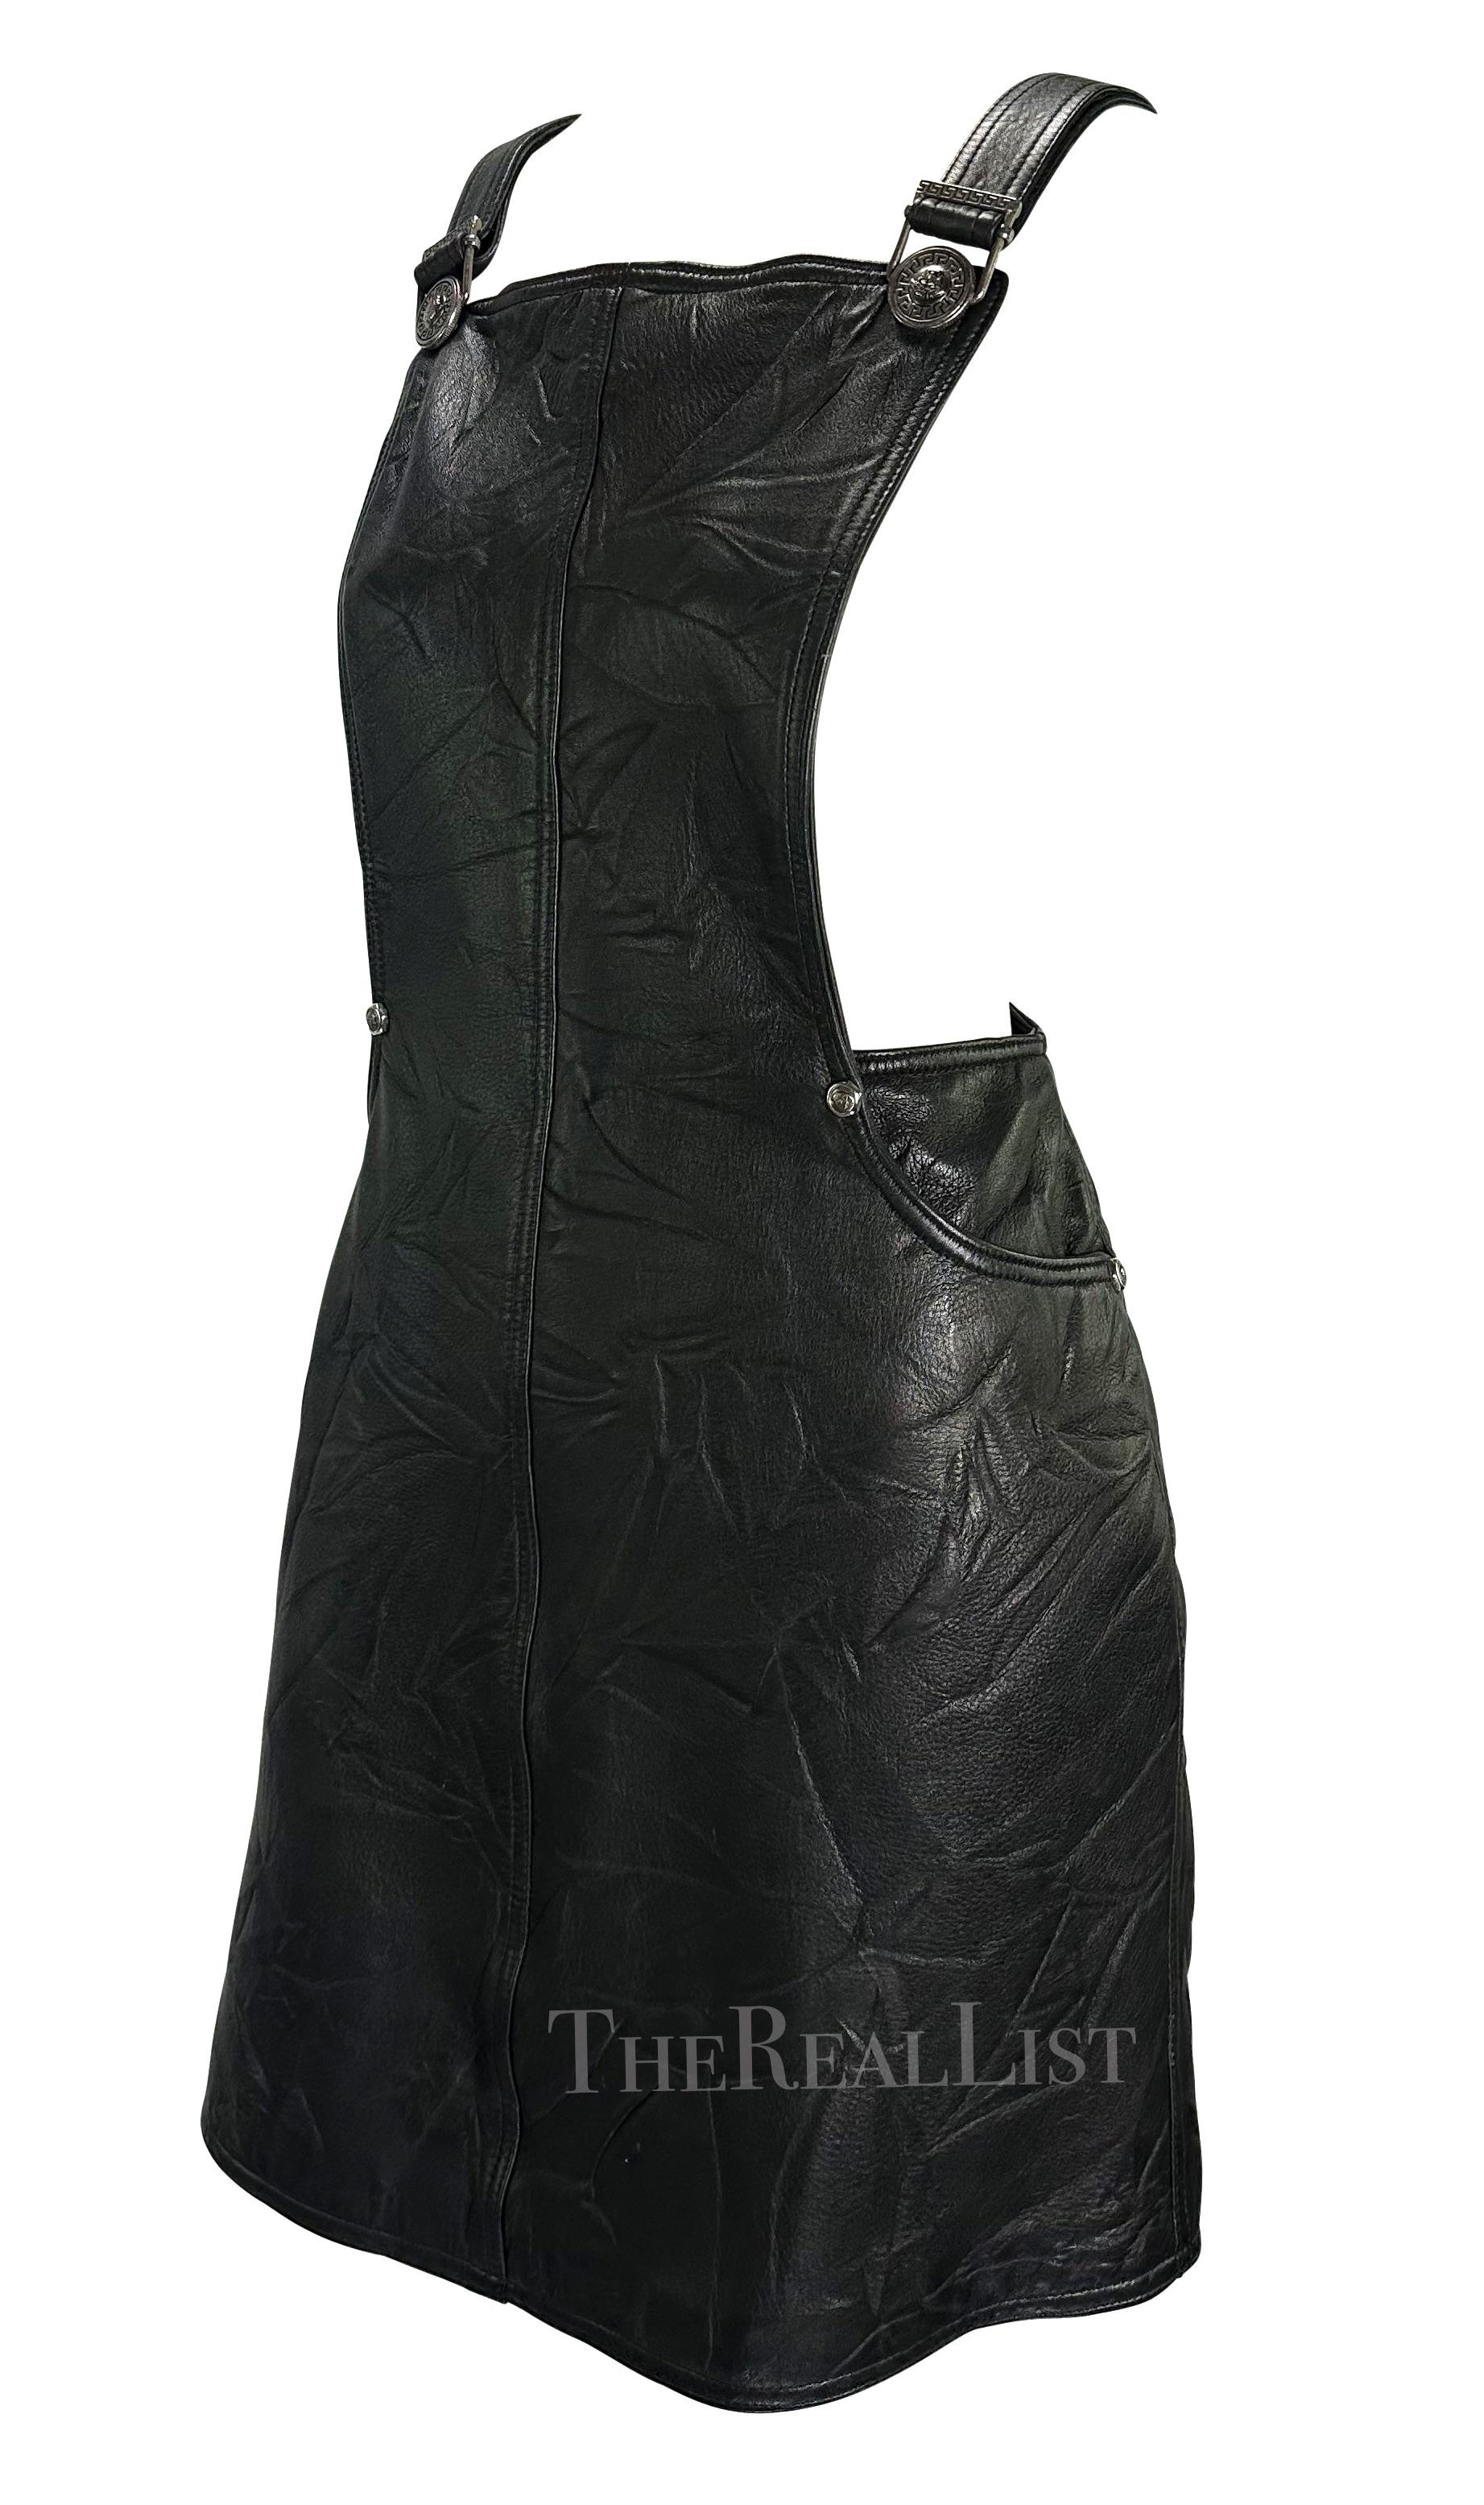 Presenting a fabulous black leather Gianni Versace overall style dress, designed by Gianni Versace. From the Fall/Winter 1994 collection this beautiful leather dress is intentionally wrinkled and creased - a motif that was heavily used in the